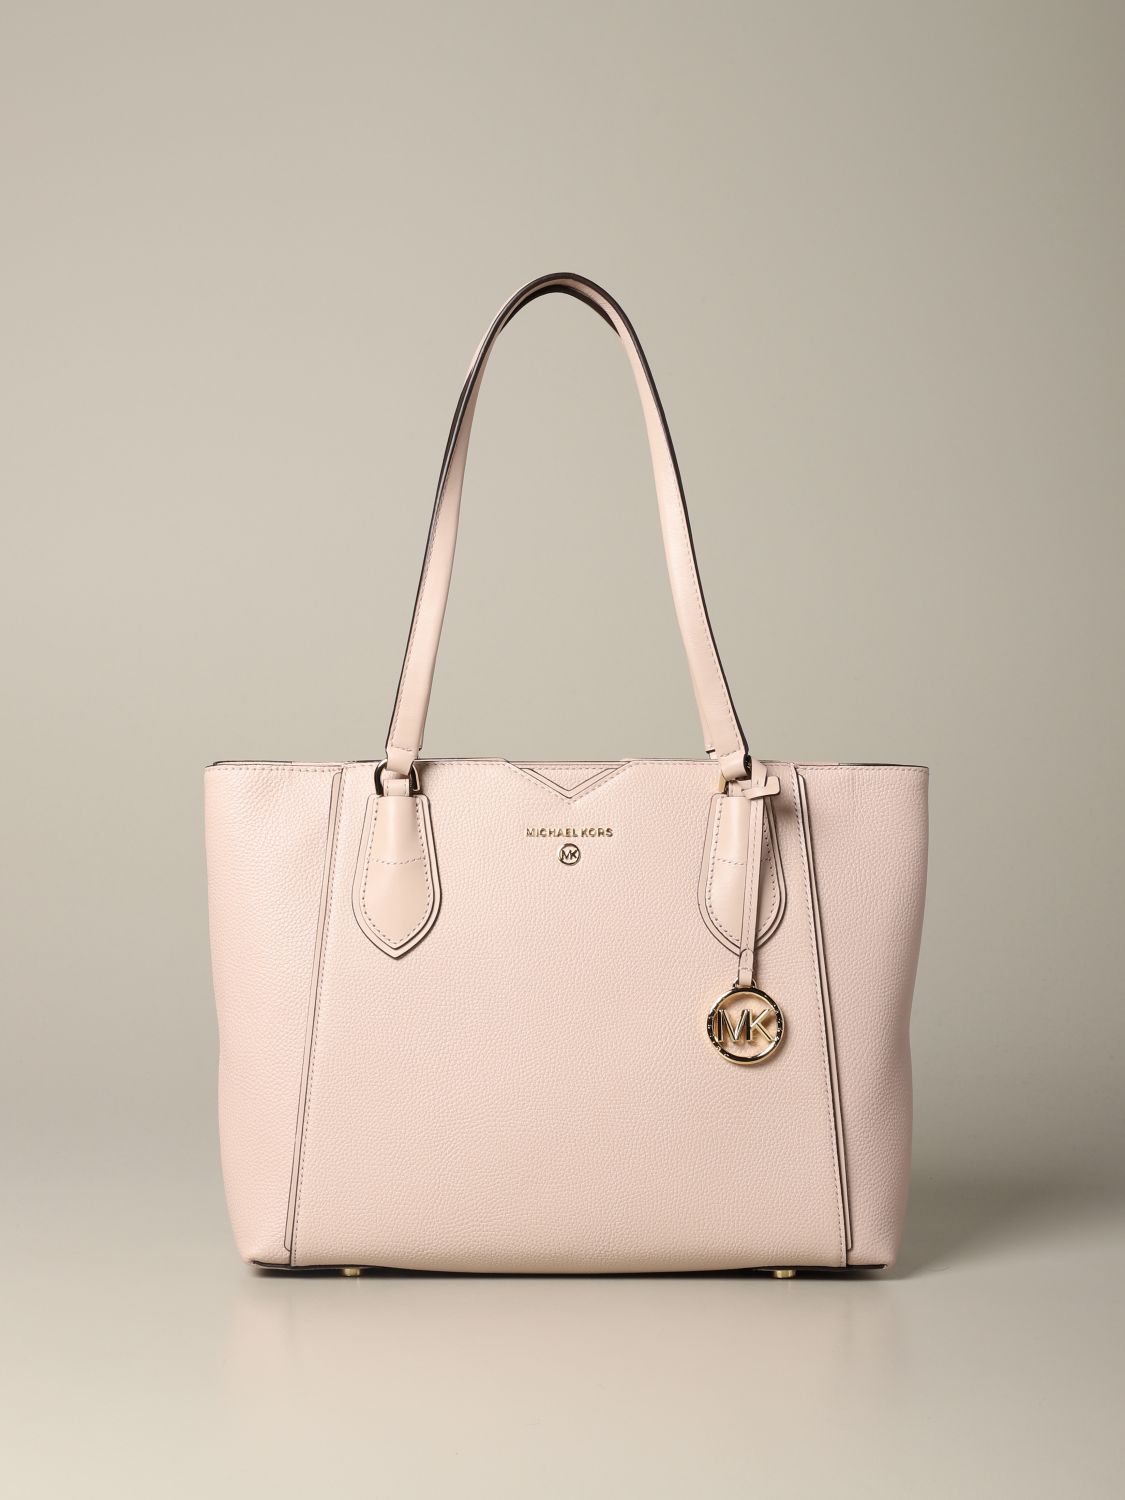 Michael Kors Outlet: Mae Michael bag in textured leather with logo - Pink | Michael  Kors tote bags 30H9GM5T2L online on 